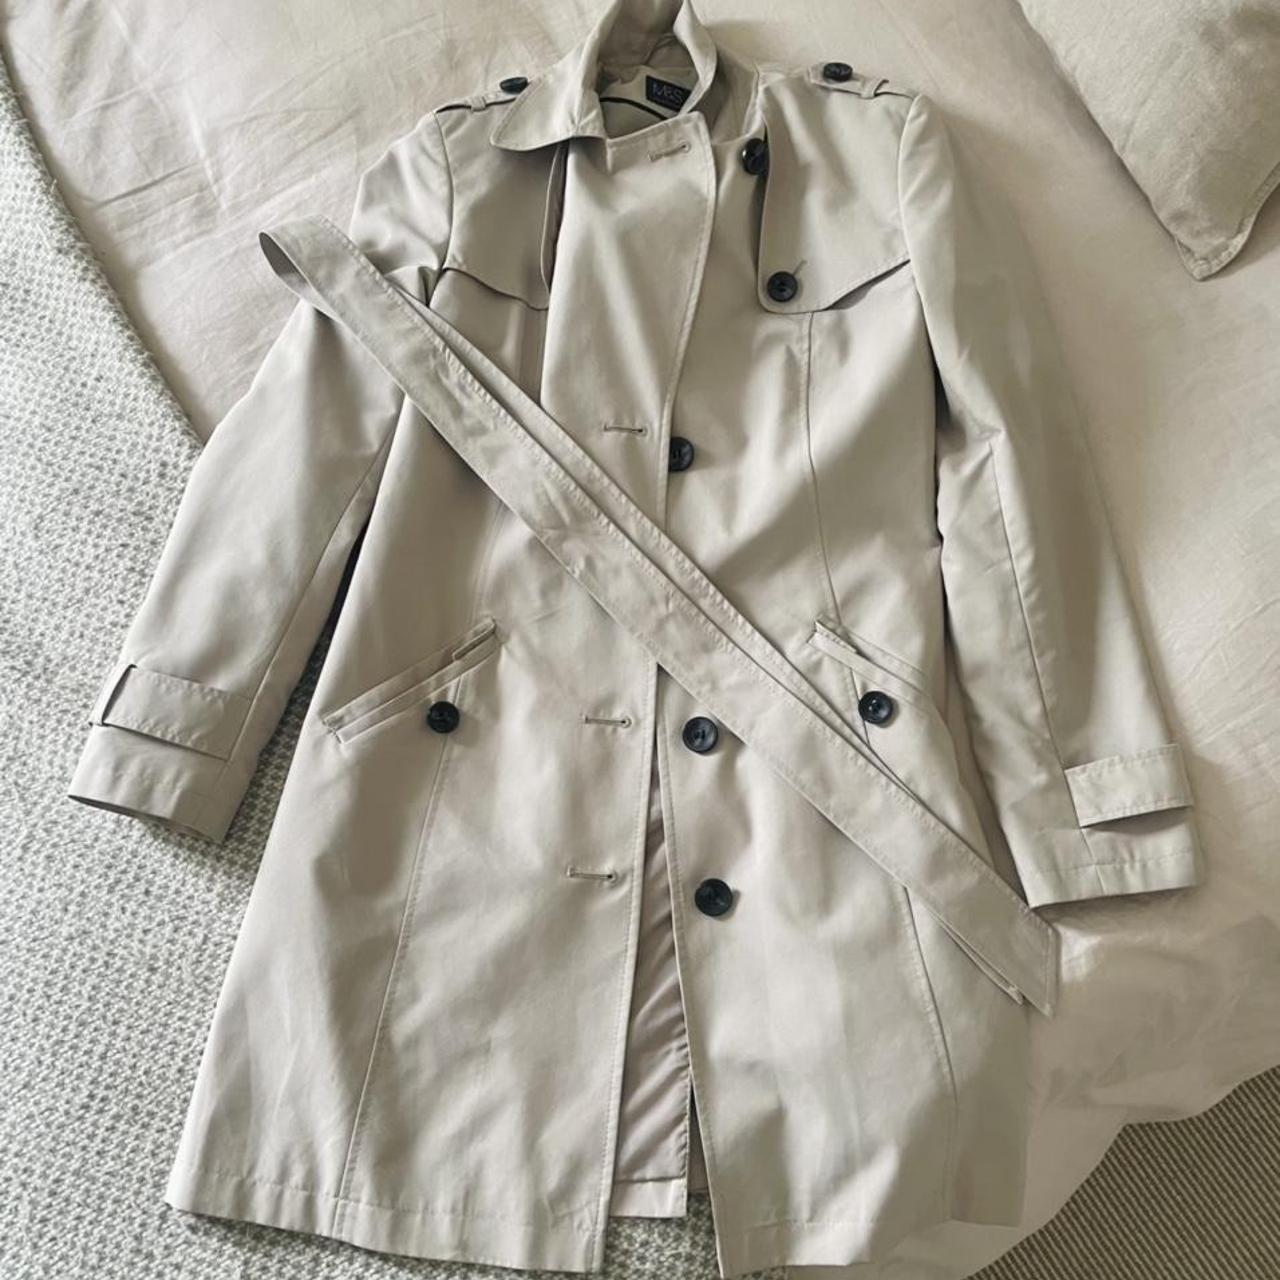 M&S classic trench coat. Size 8. Barely worn and in... - Depop